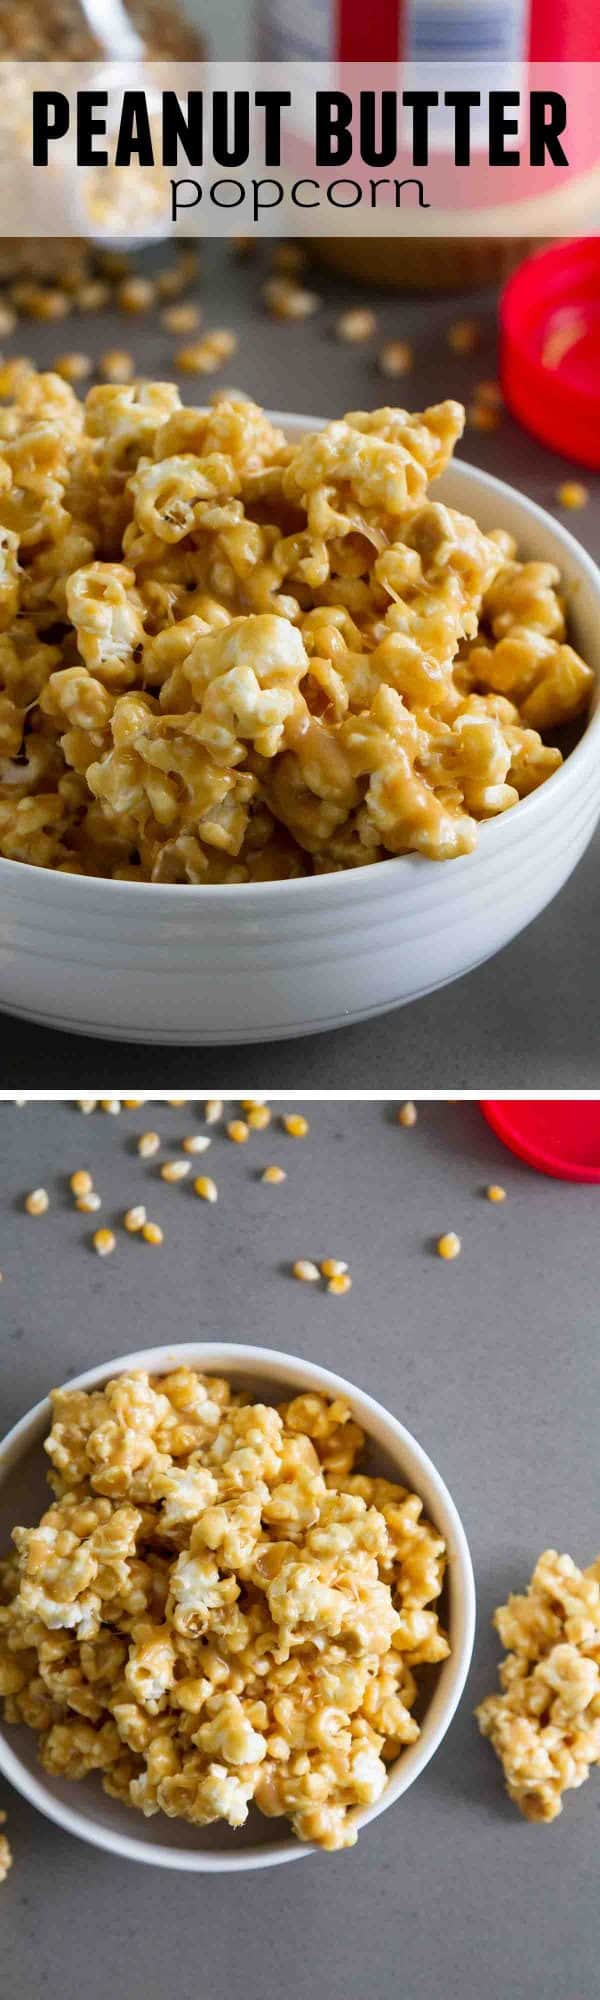 Peanut butter lovers won’t be able to stay away from this Peanut Butter Popcorn - popcorn that is coated with a sweet and sticky peanut butter coating.